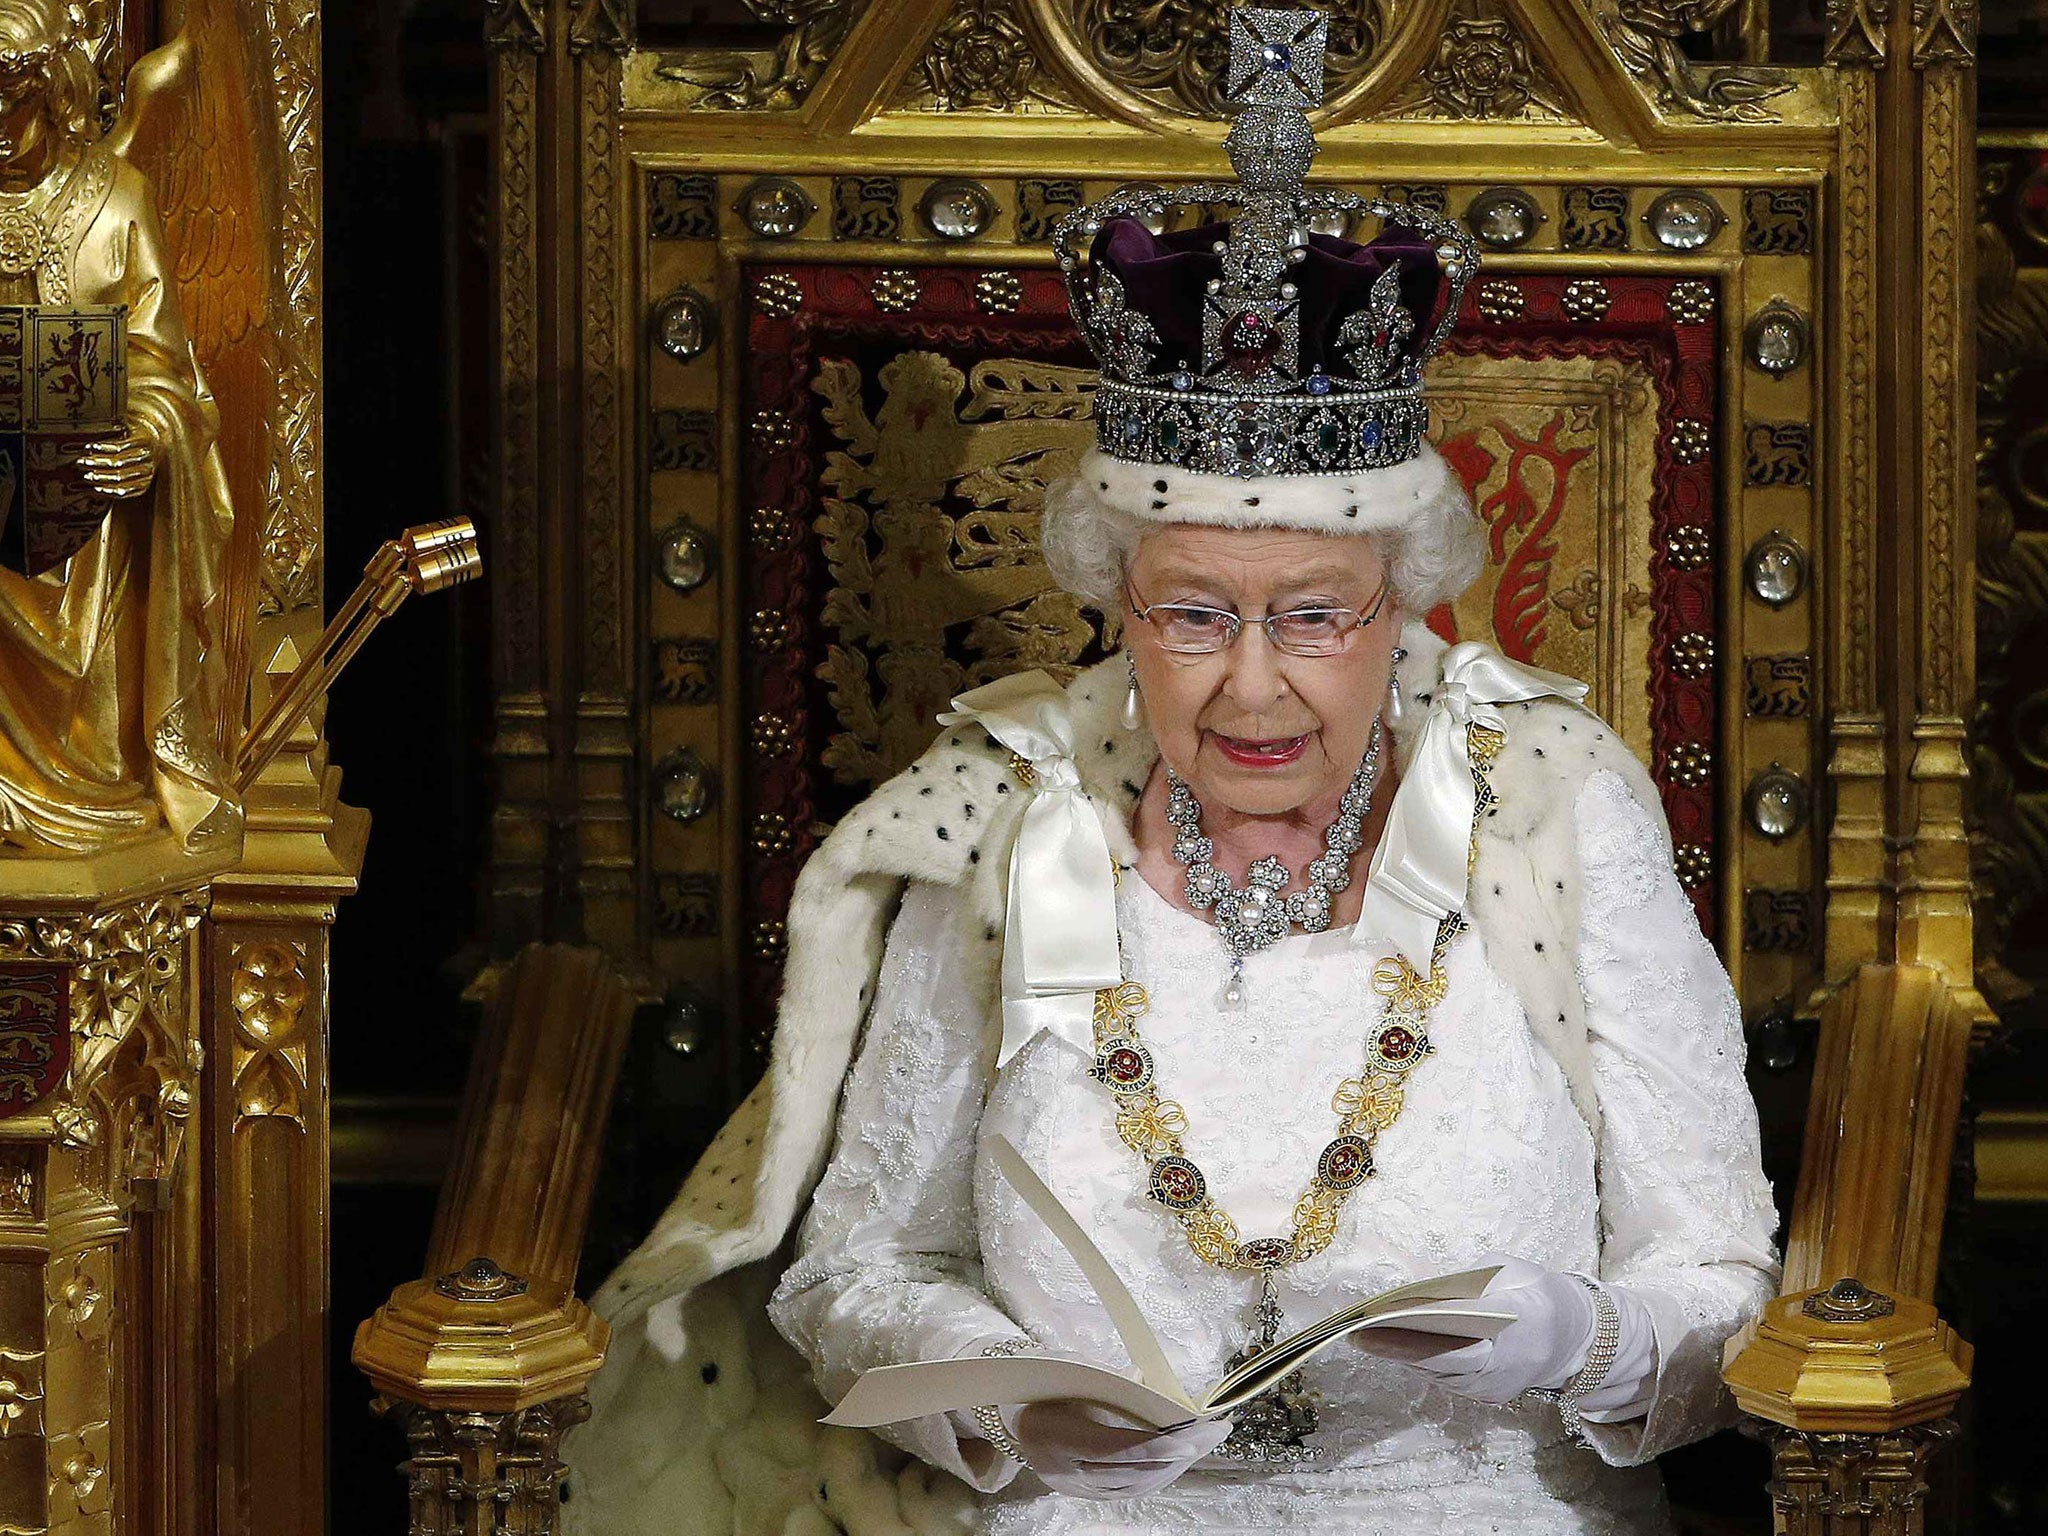 Queen Elizabeth II delivers her speech during the State Opening of Parliament in the House of Lords at the Palace of Westminster on June 4, 2014 in London, England.